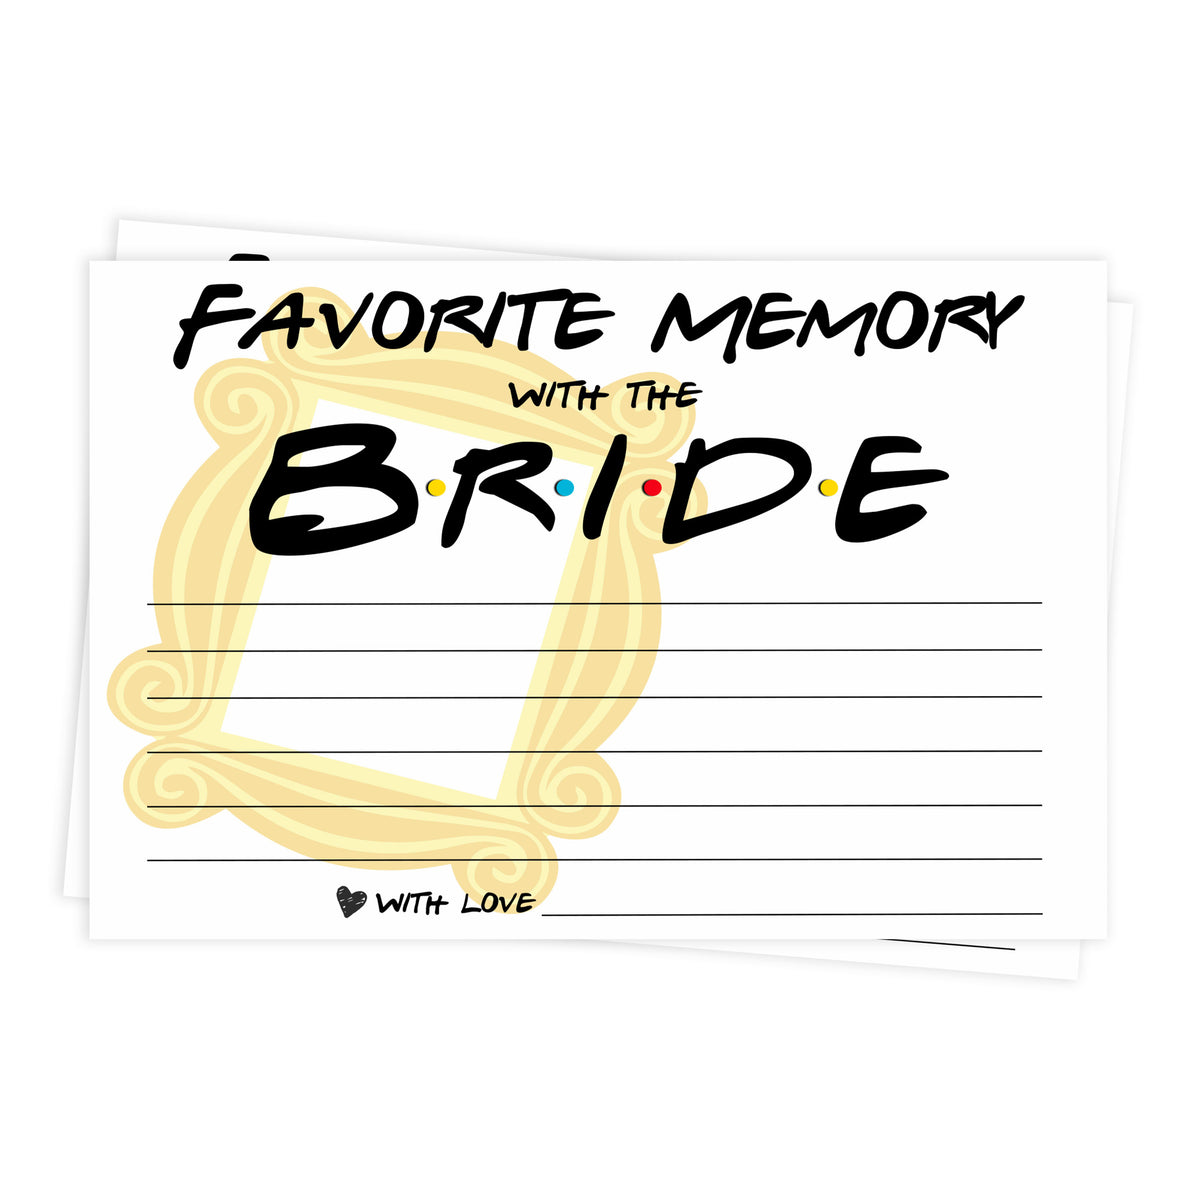 favorite memory with the bride game, Printable bridal shower games, friends bridal shower, friends bridal shower games, fun bridal shower games, bridal shower game ideas, friends bridal shower